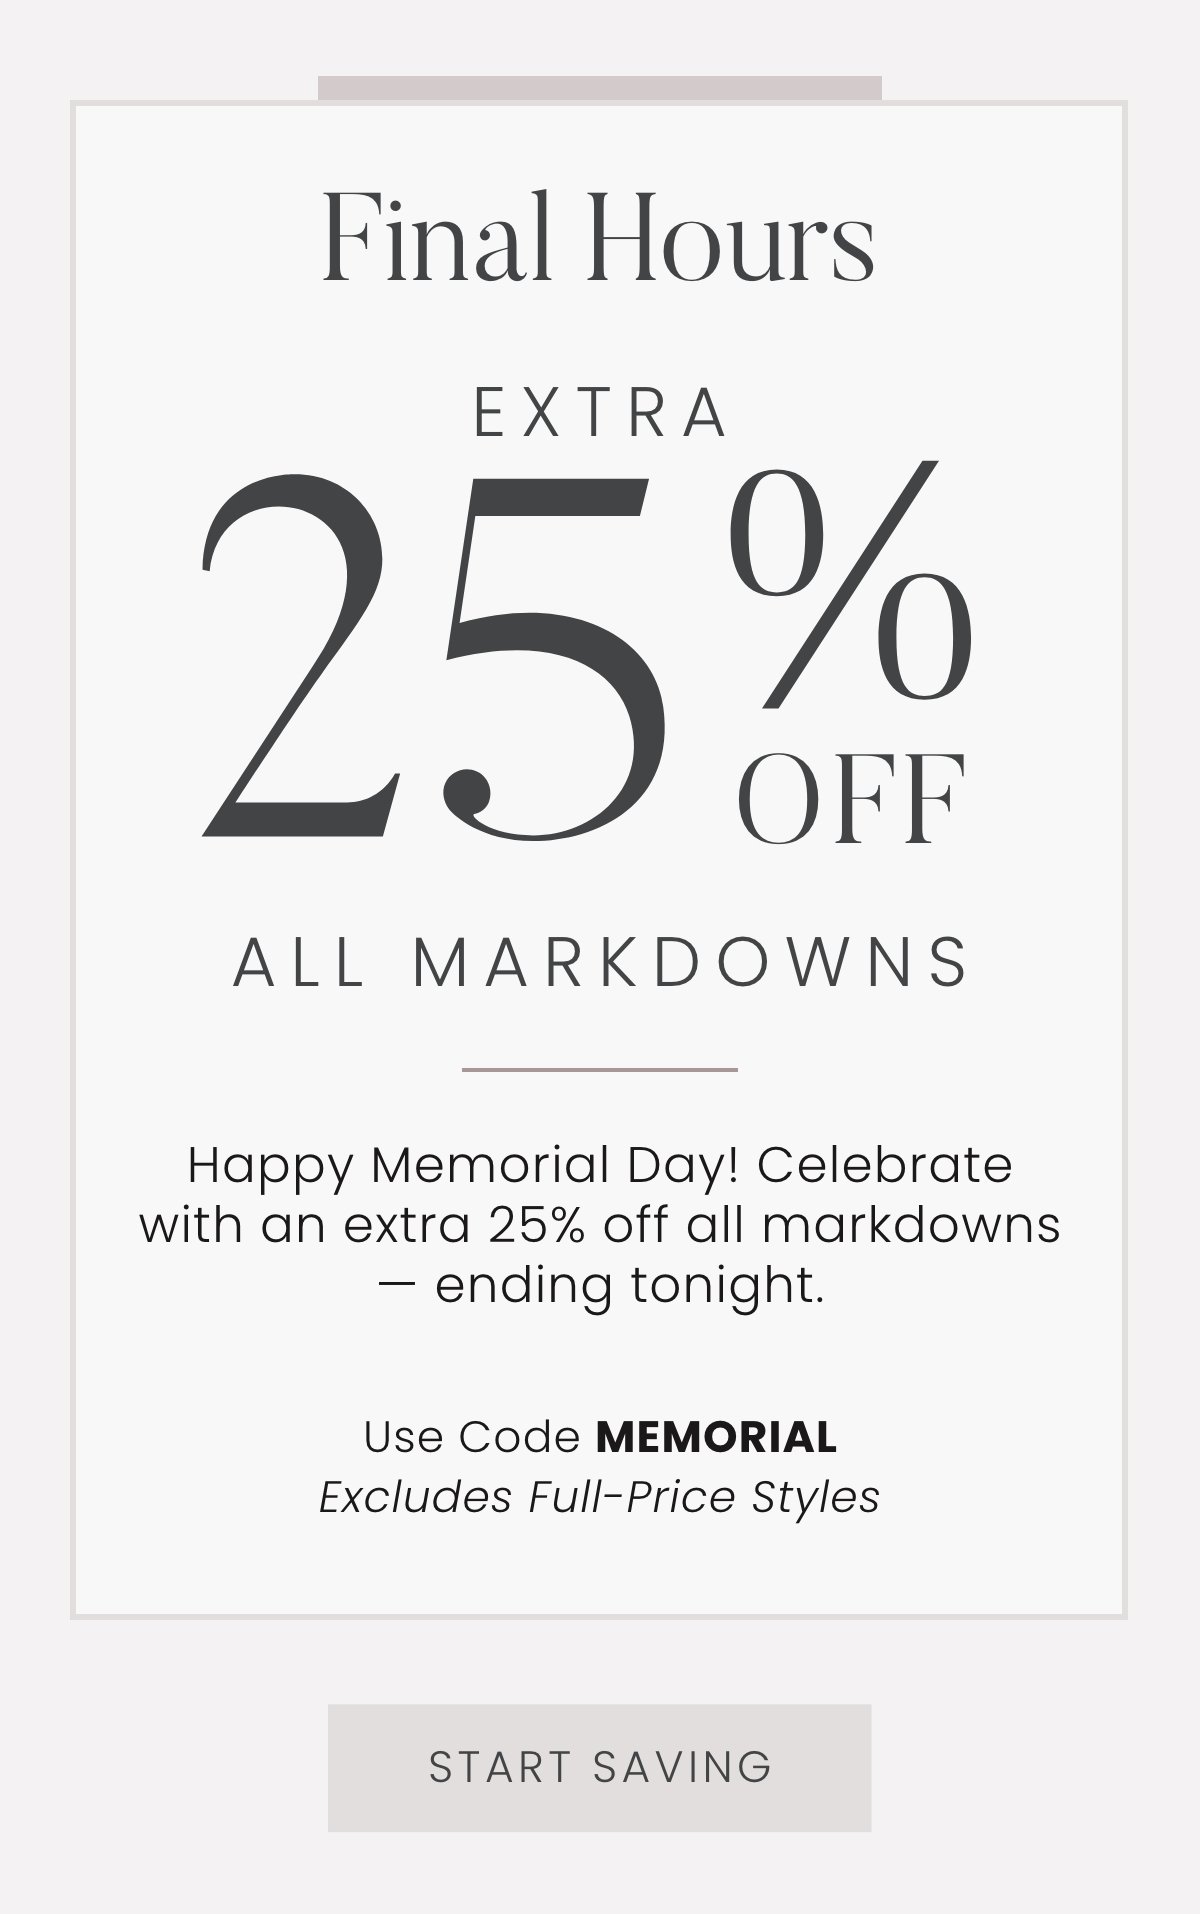 Final Hours: Extra 25% Off All Markdowns - Happy Memorial Day! Celebrate with an extra 25% off all markdowns — ending tonight. Use code MEMORIAL. Excludes Full-Price Styles. Start Saving >>